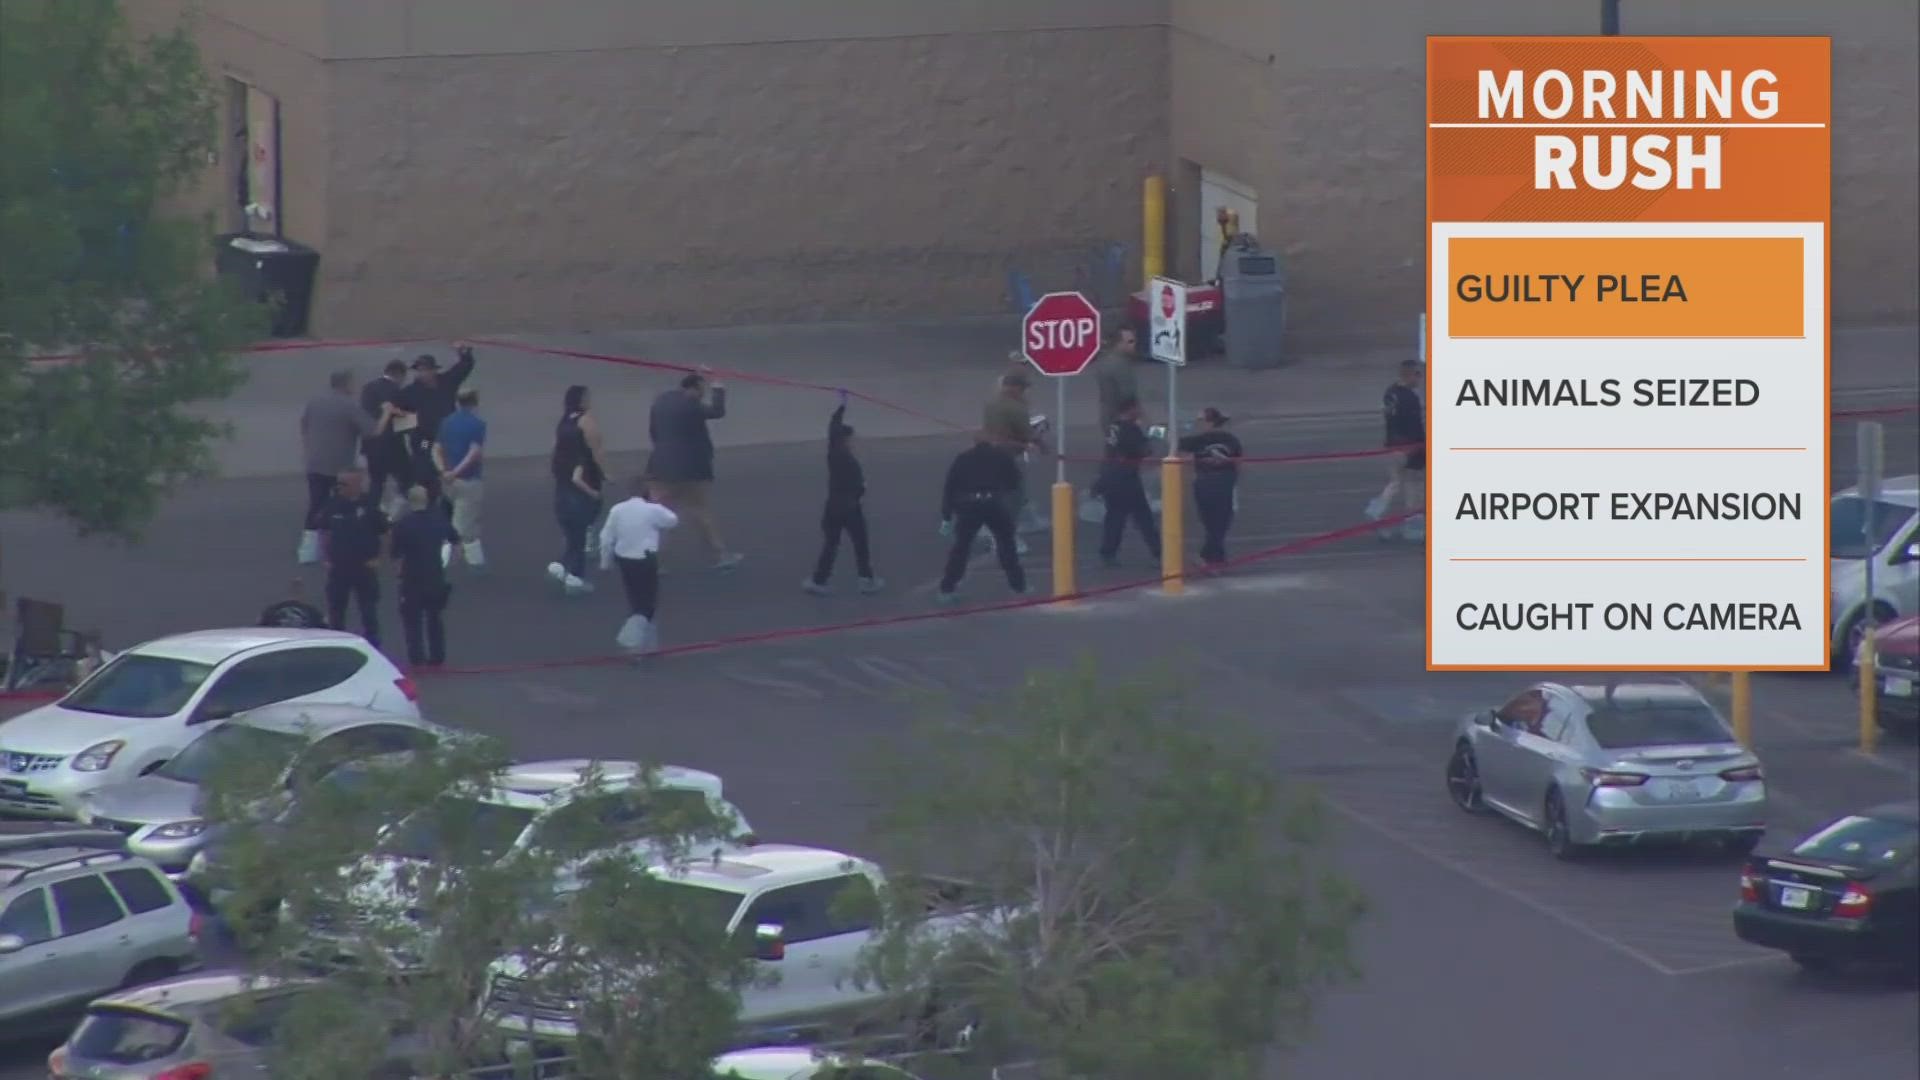 The suspect faces 90 federal charges for the El Paso Walmart shooting that killed 23 people in 2019.